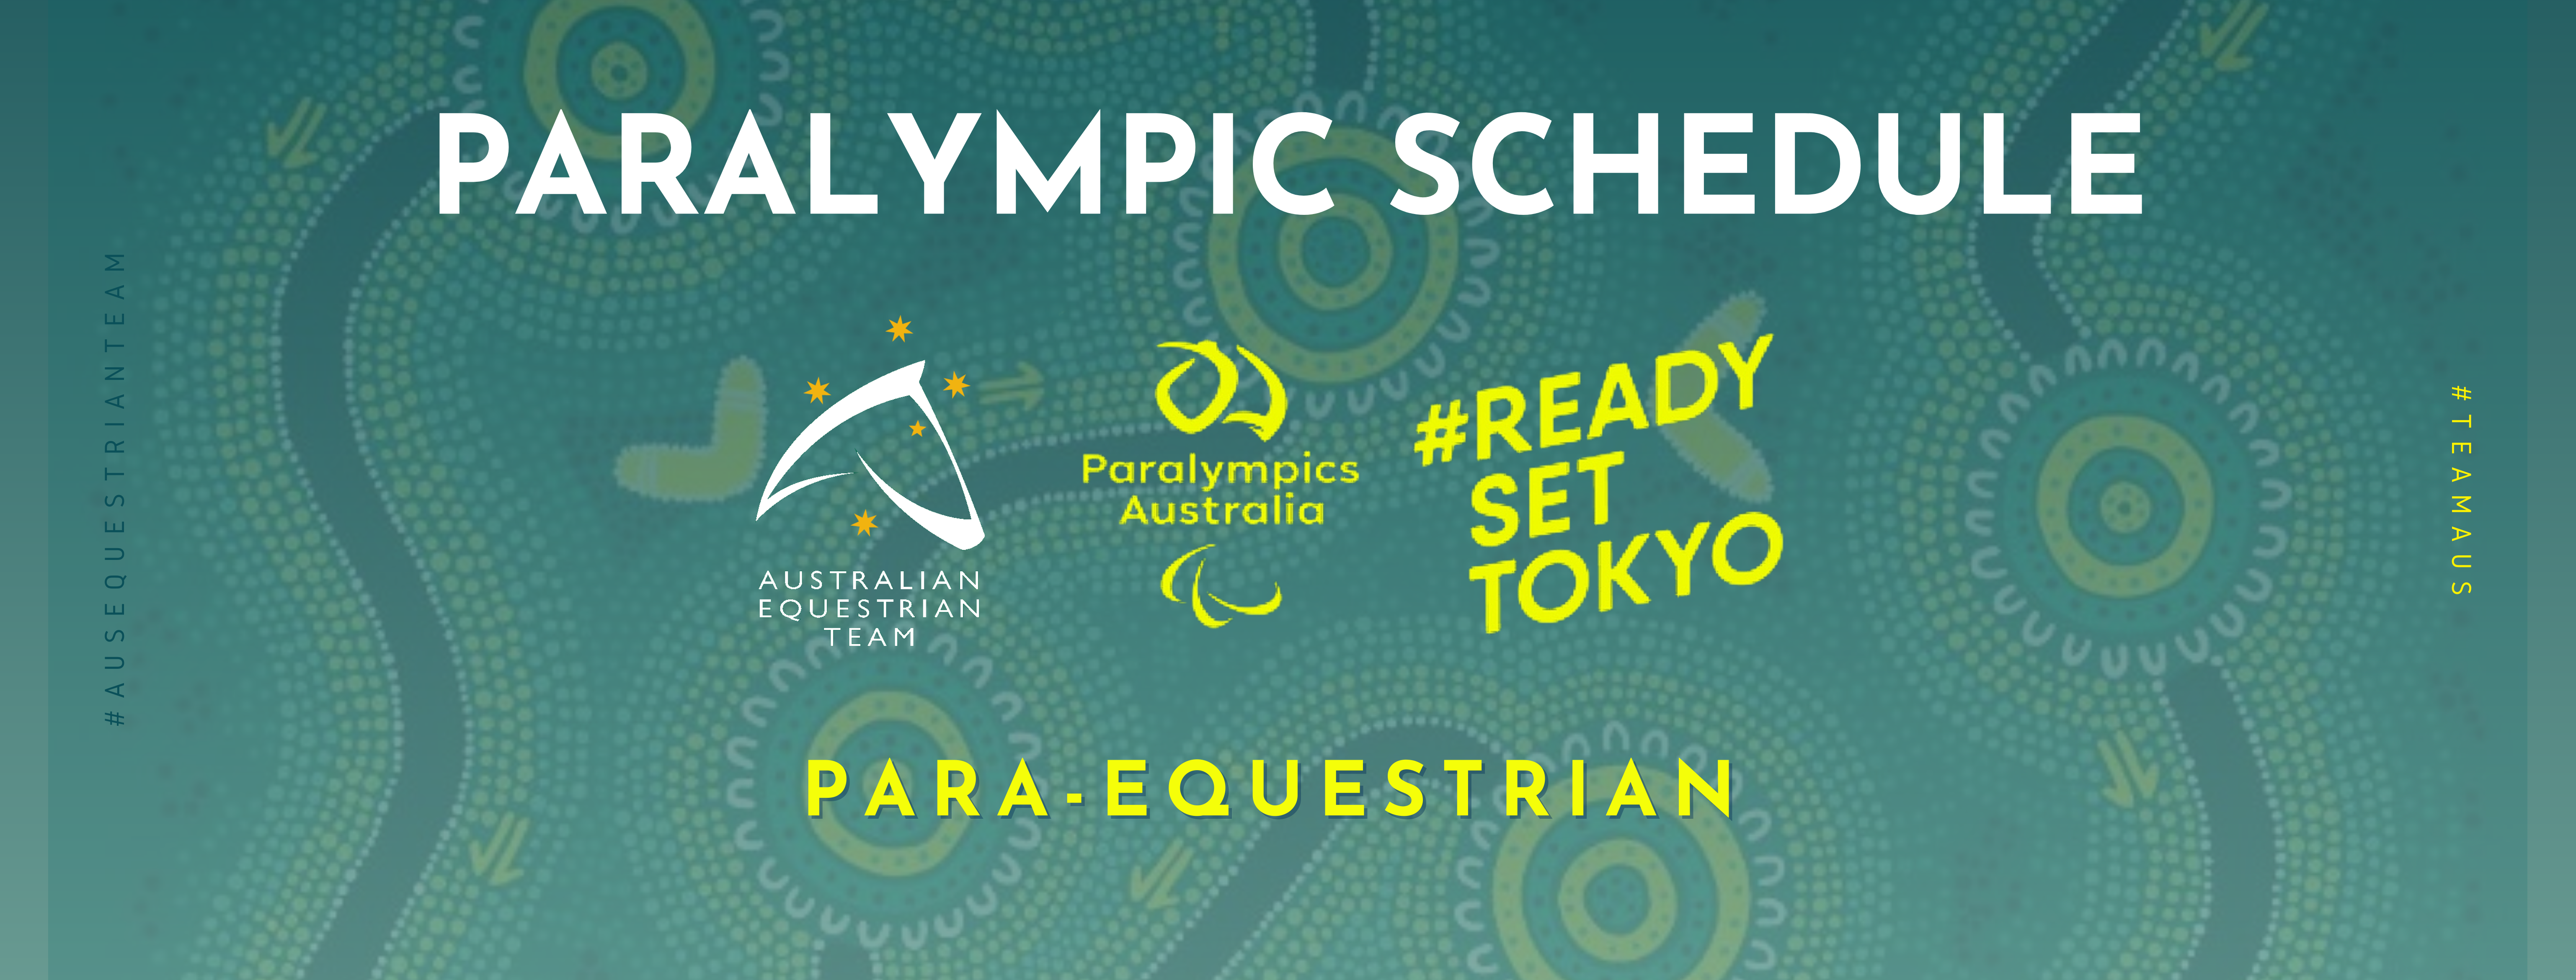 Paralympic schedule